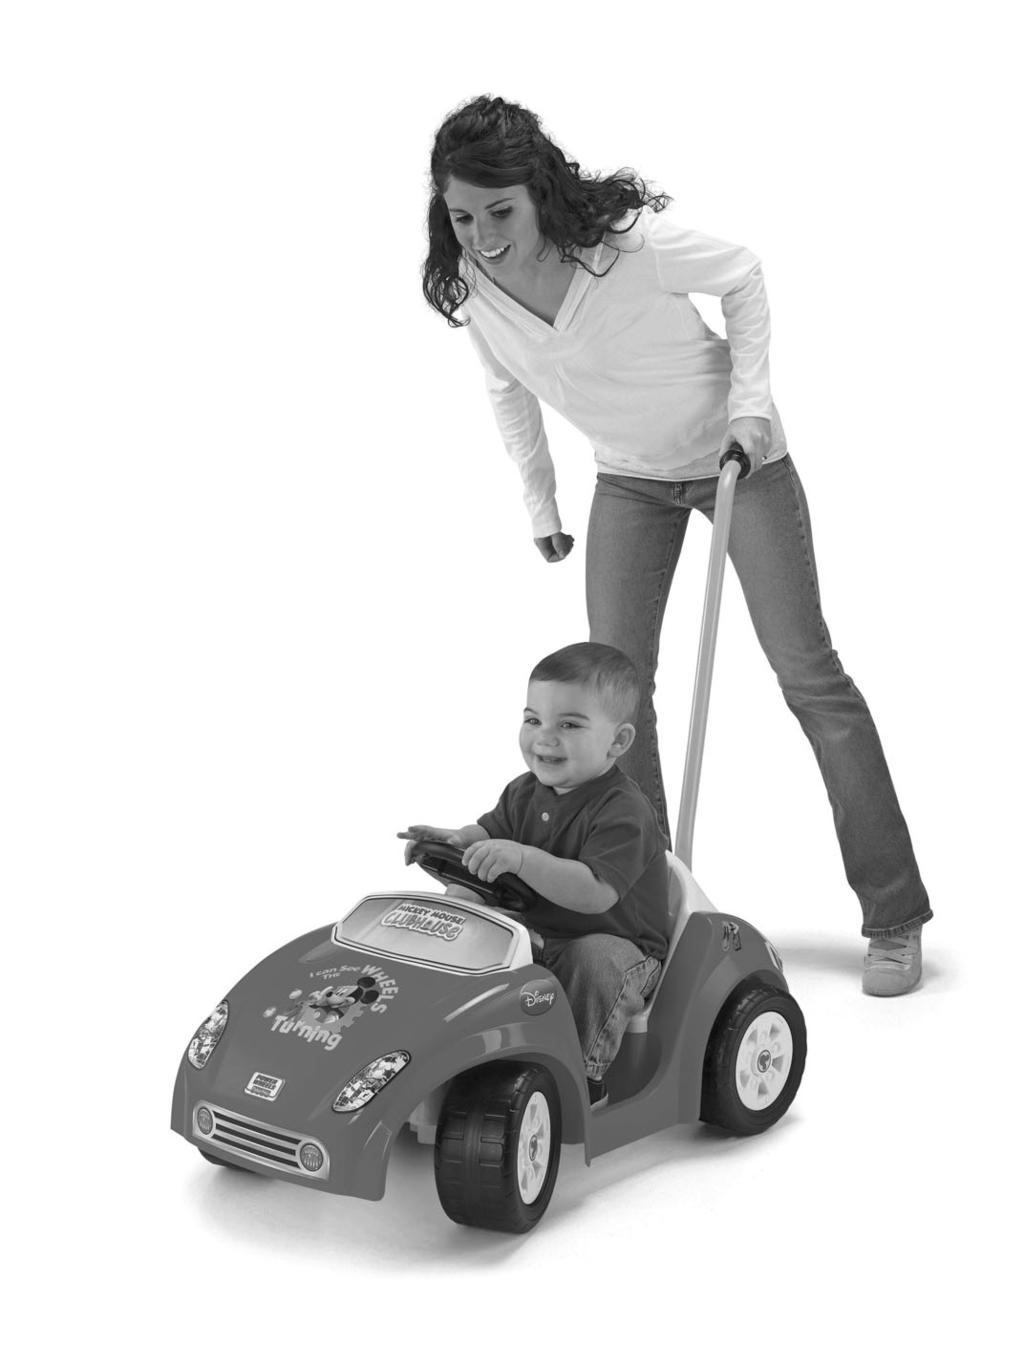 Tot Rod Two learn-to-drive stages!